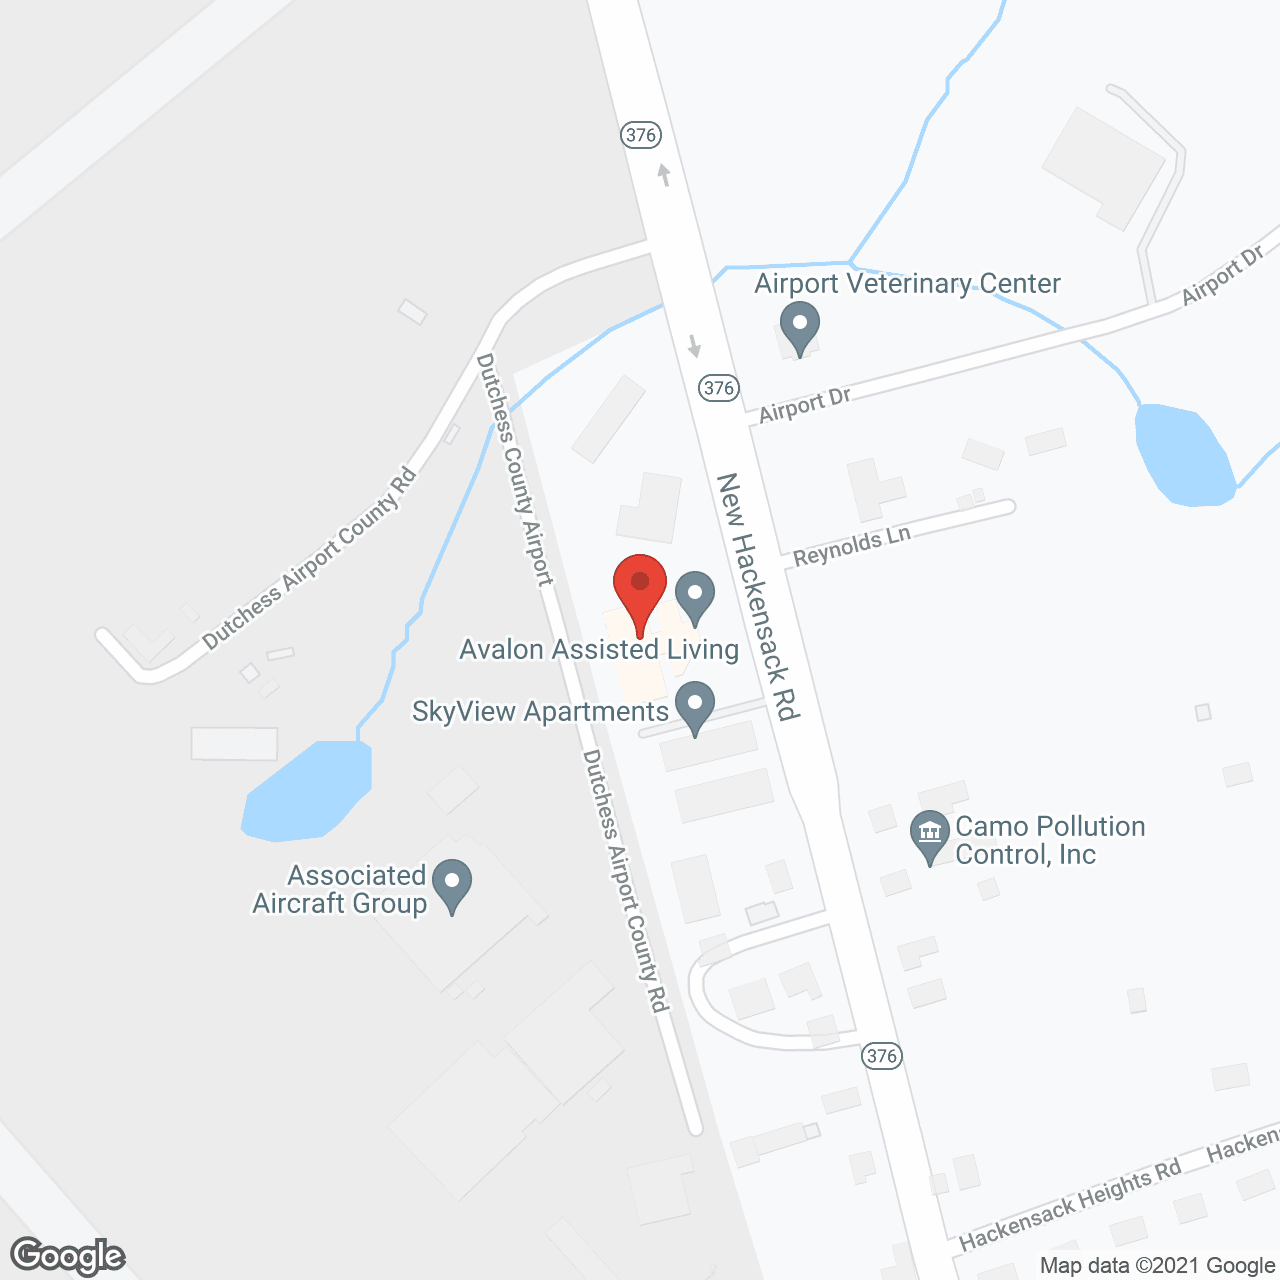 The Avalon Assisted Living and Wellness Center in google map